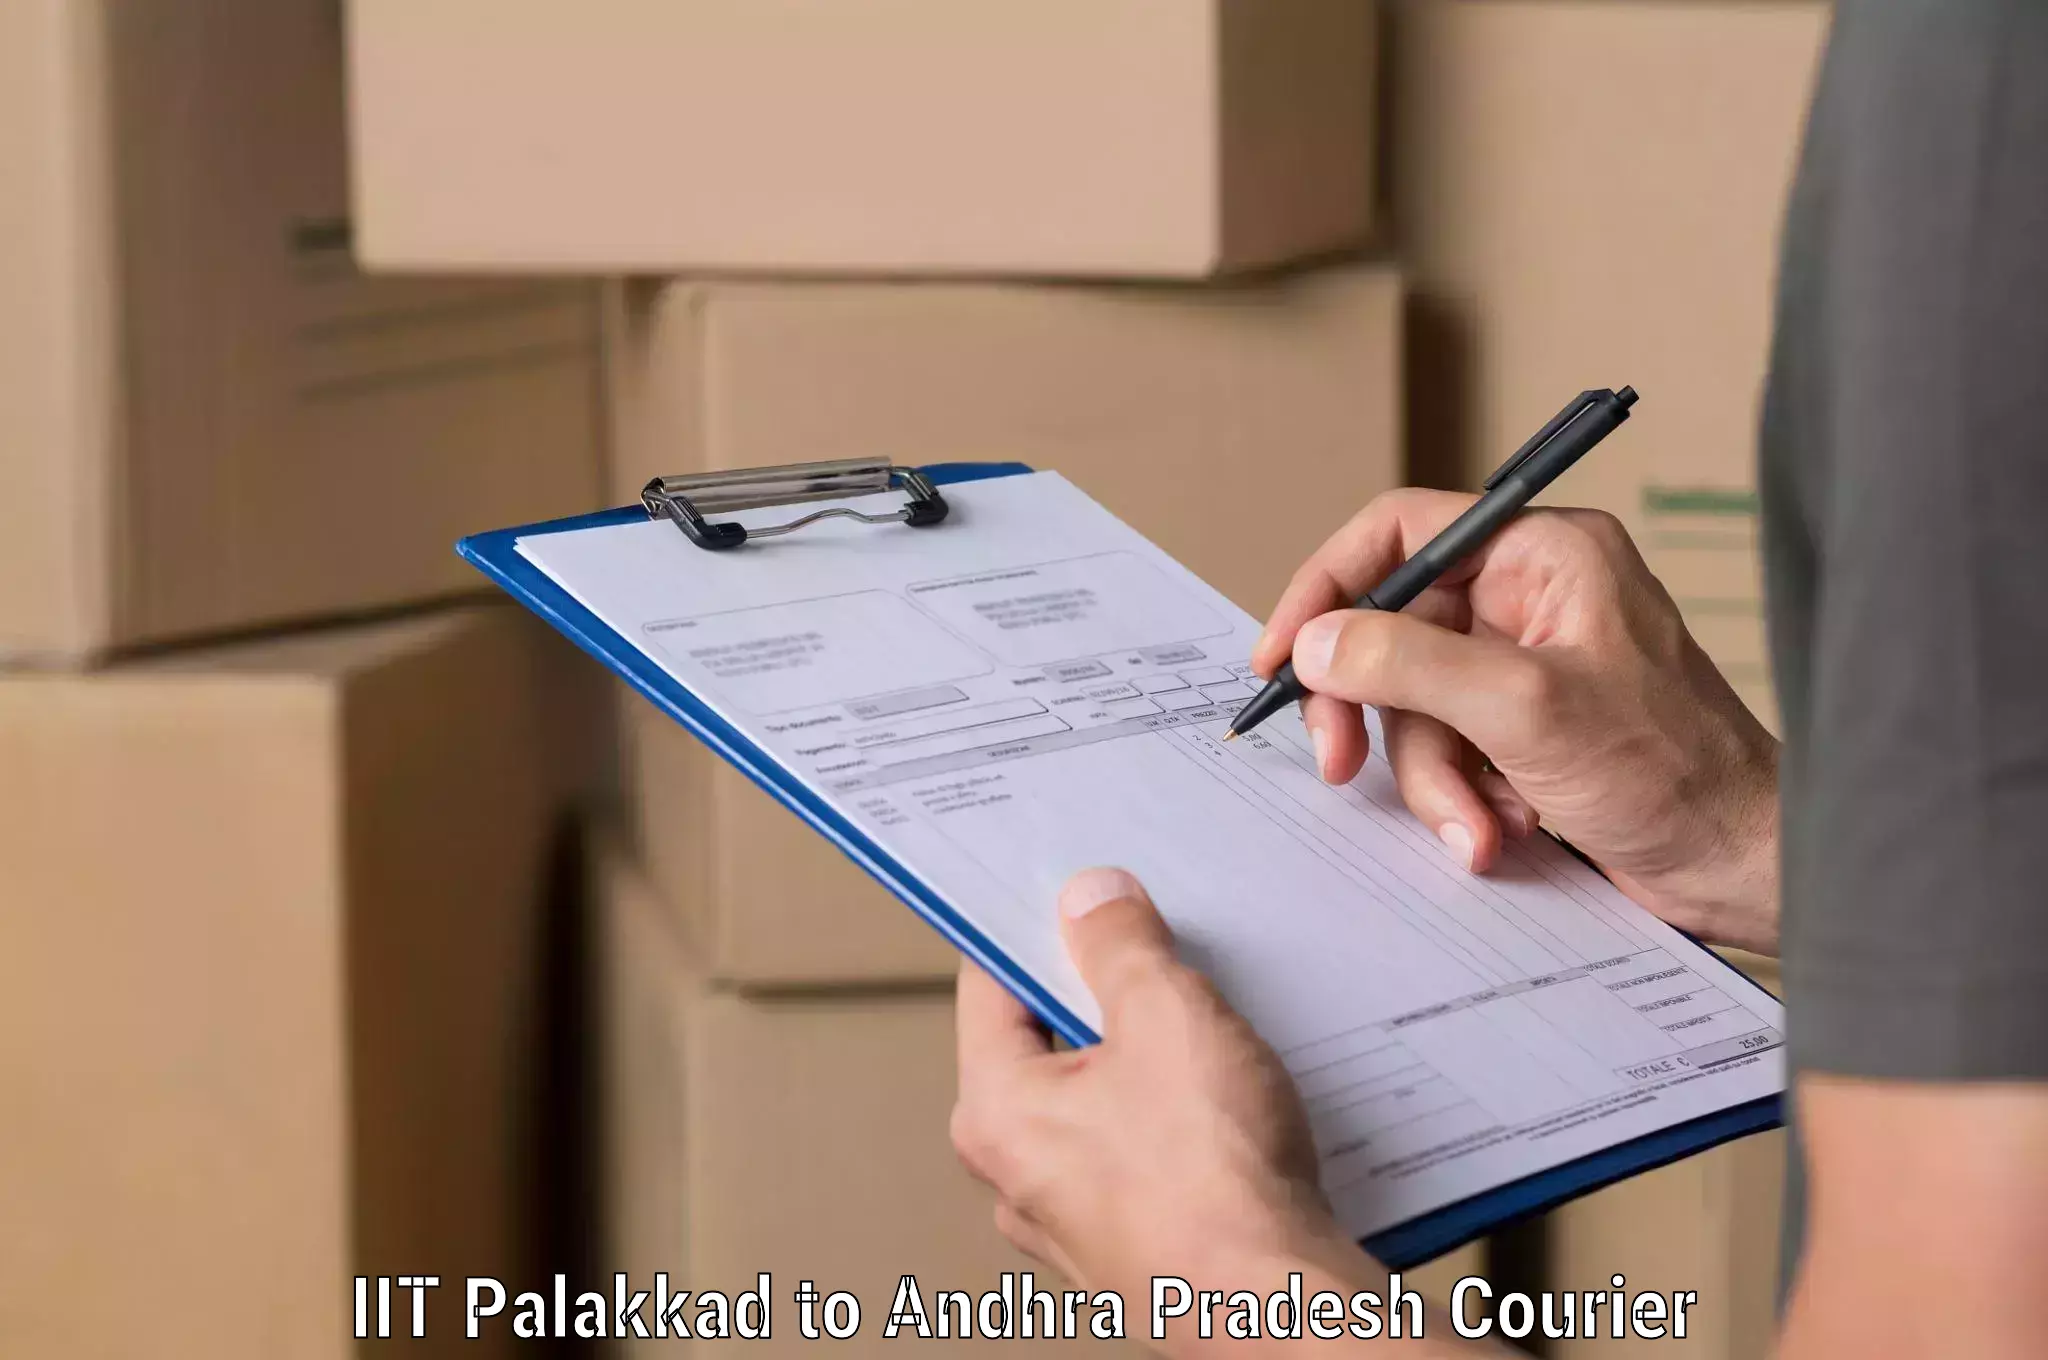 E-commerce logistics support in IIT Palakkad to Andhra Pradesh